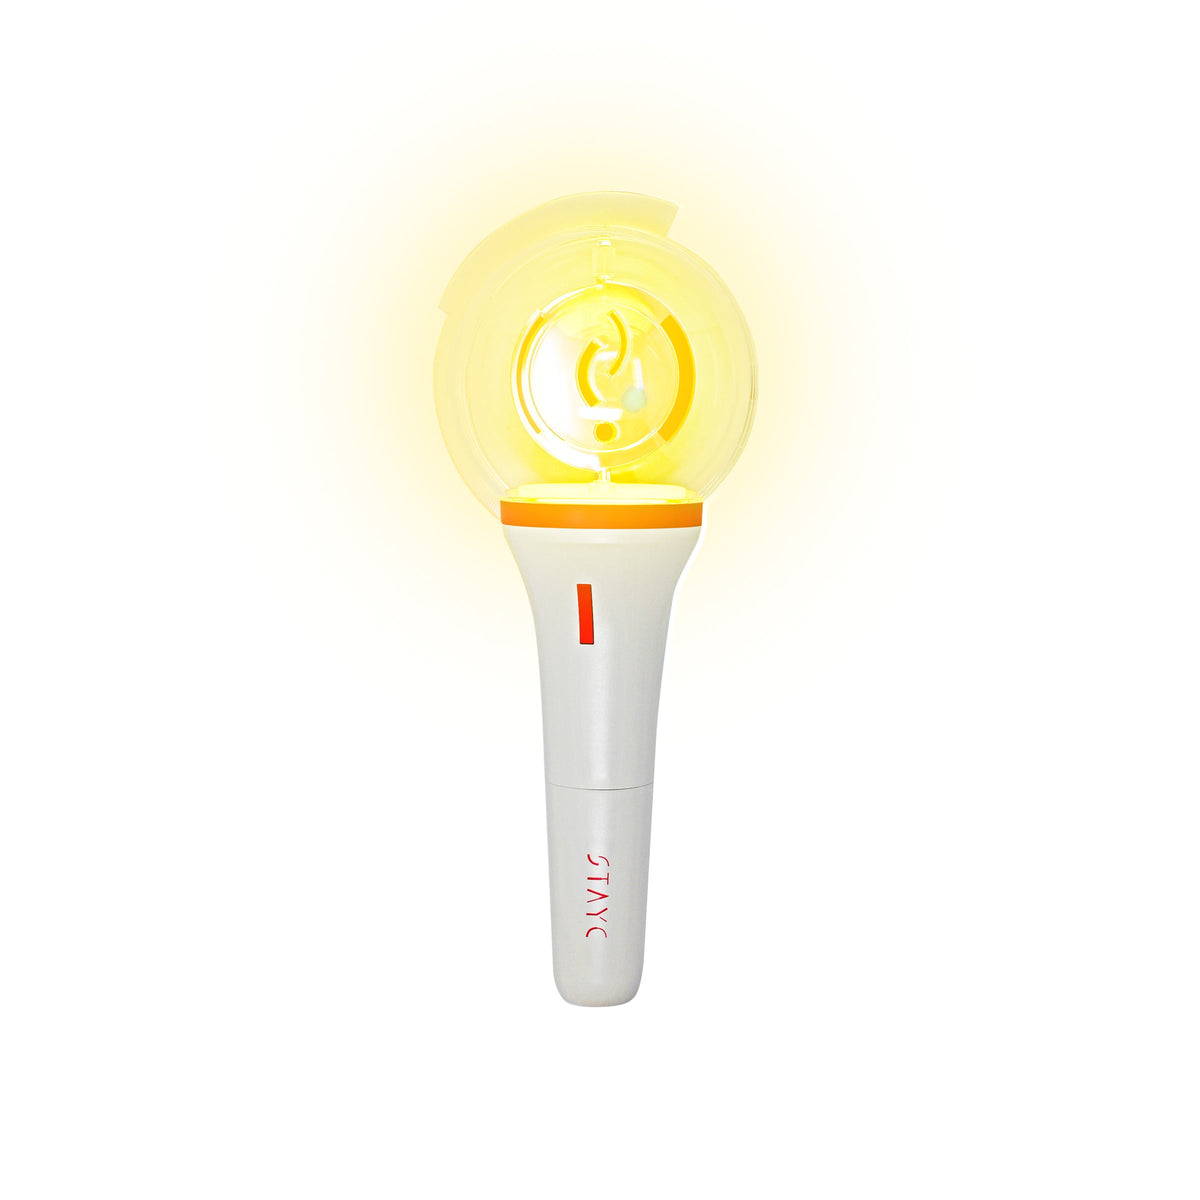 STAYC - Official Light Stick Main Image 3